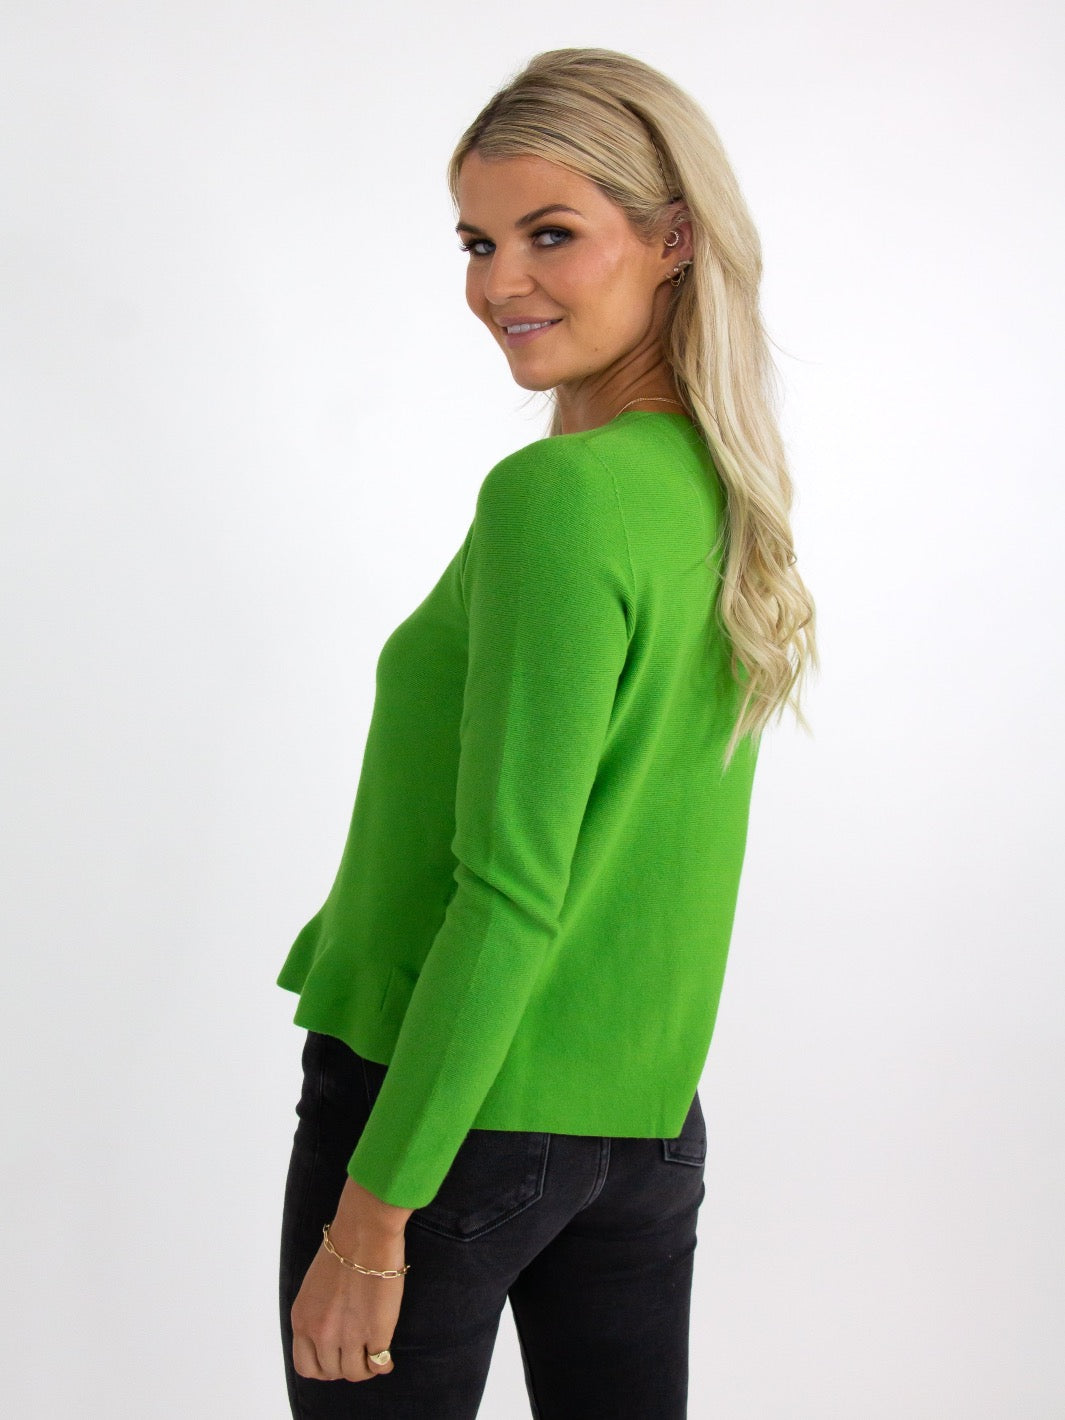 Kate & Pippa Emilia Frill Knit In Lime Green-Kate & Pippa